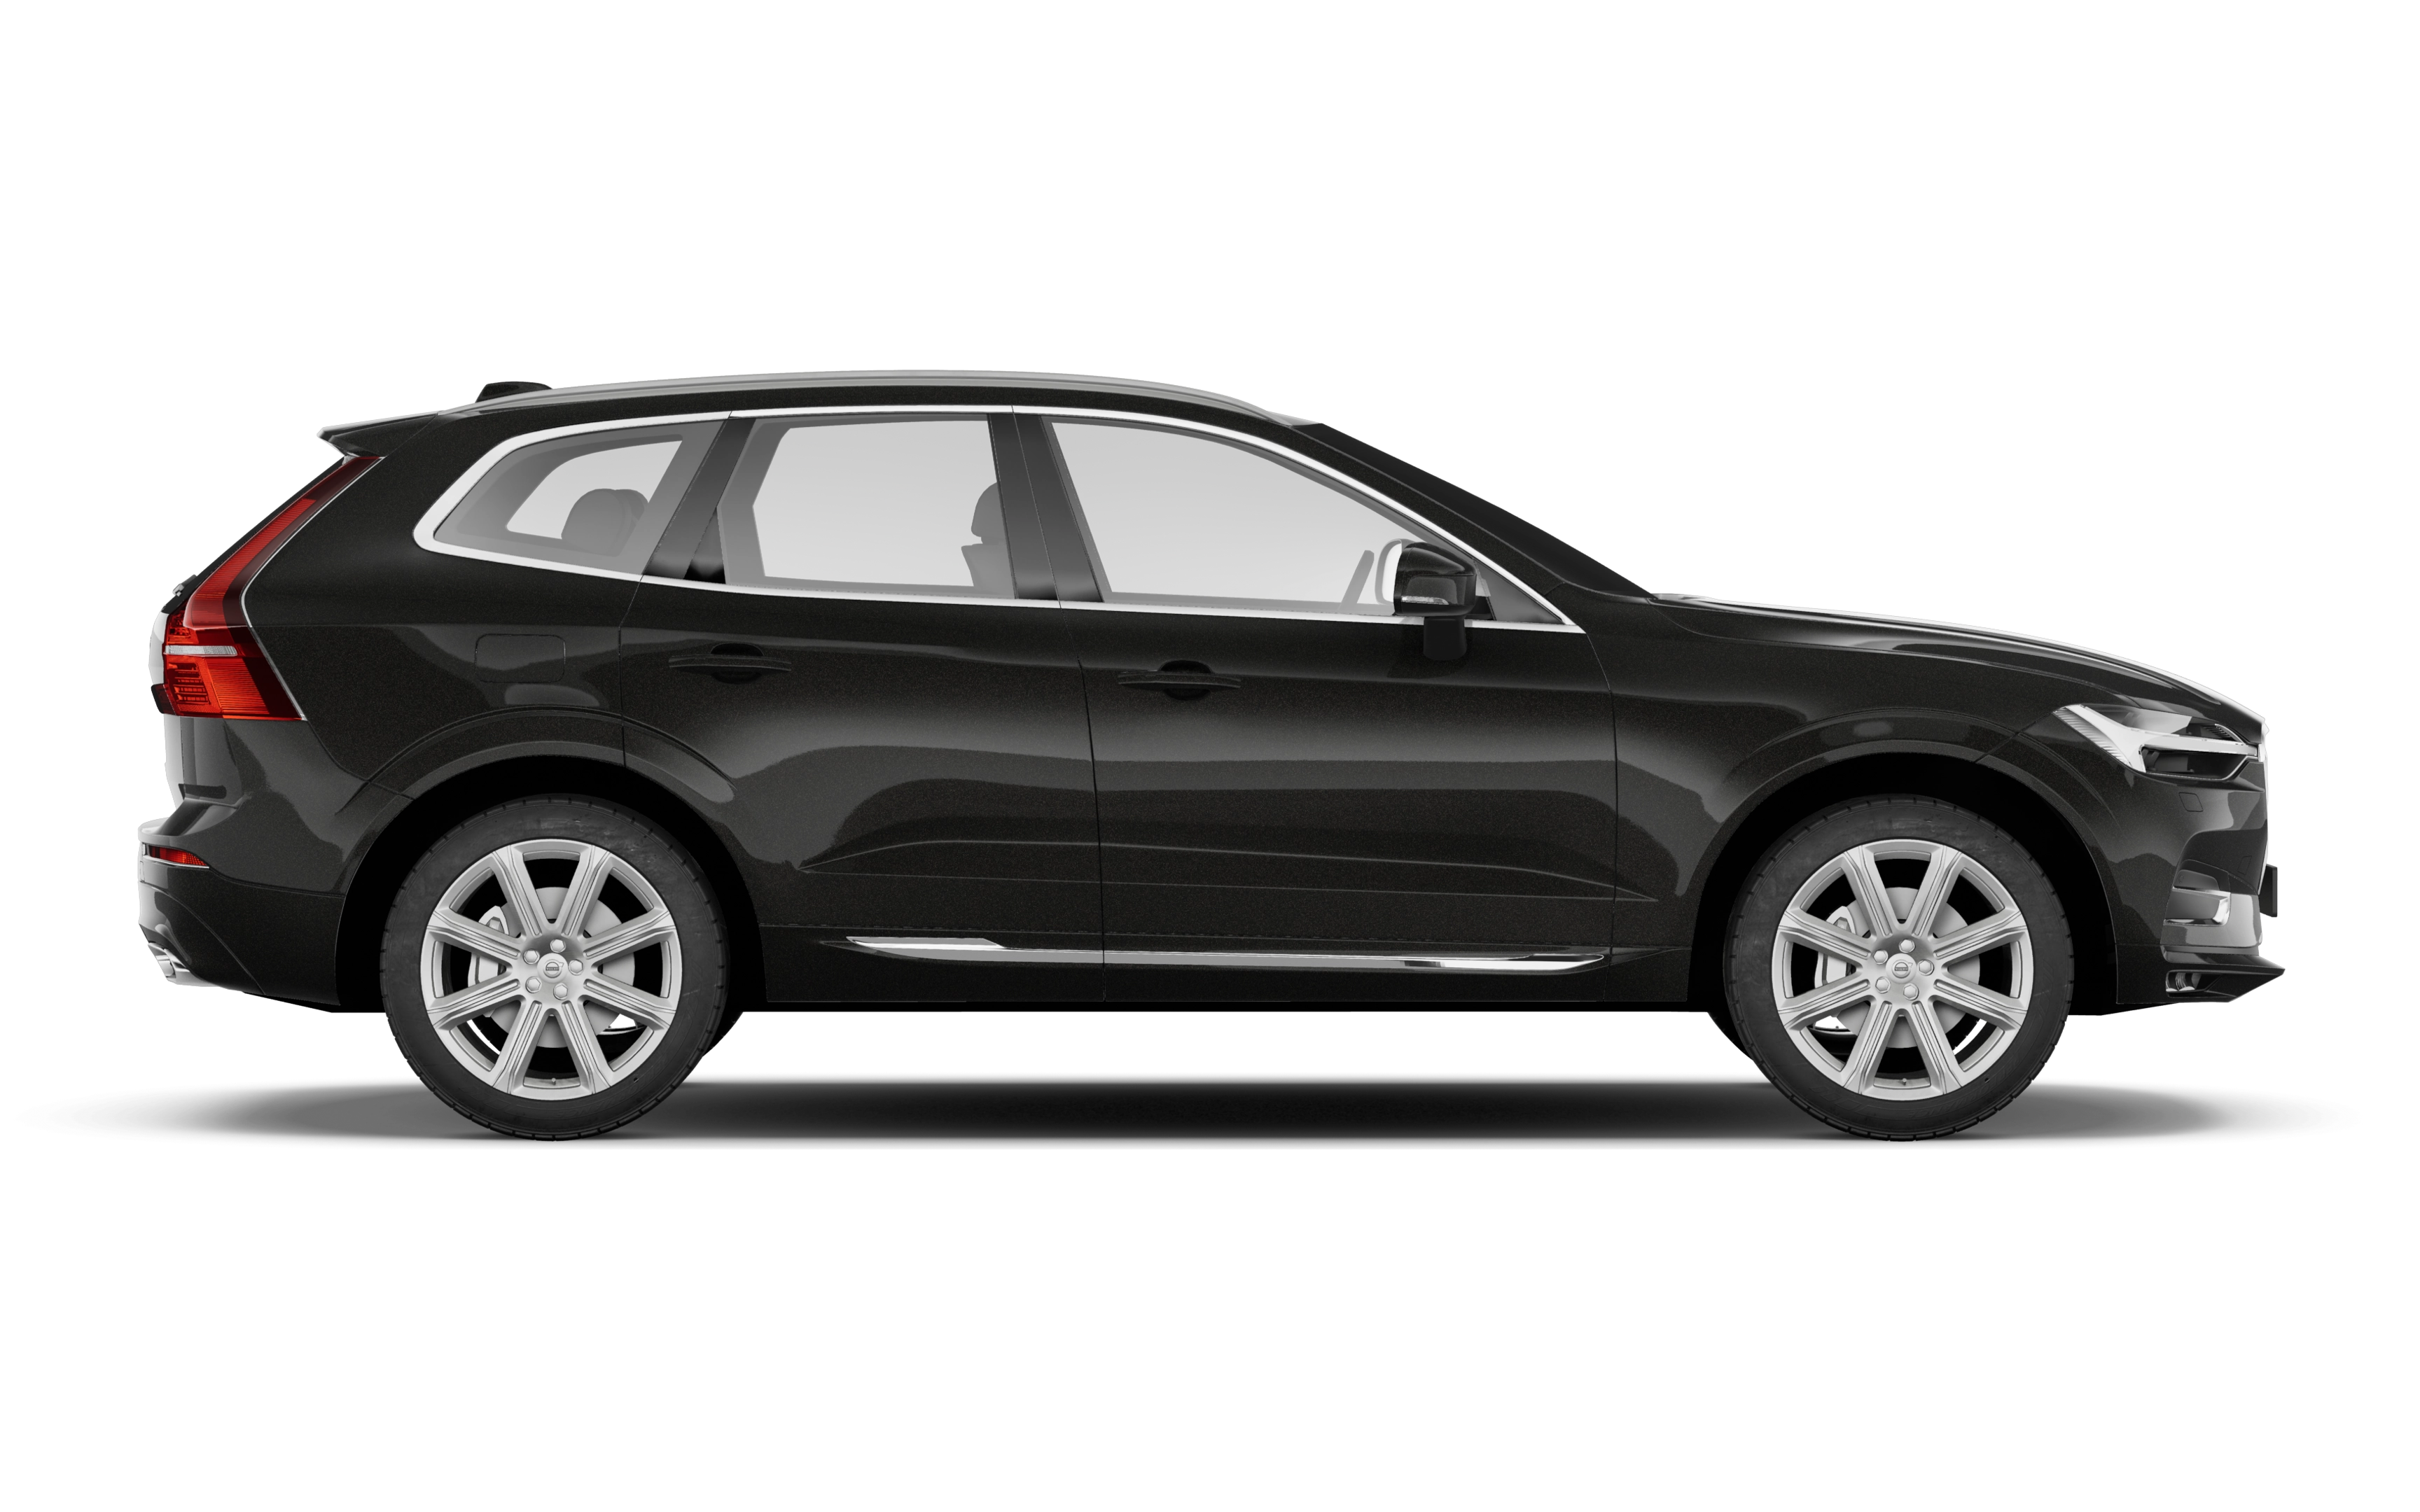 Volvo xc60 estate 2.0 b5p ultimate black edition 5 doors awd geartronic